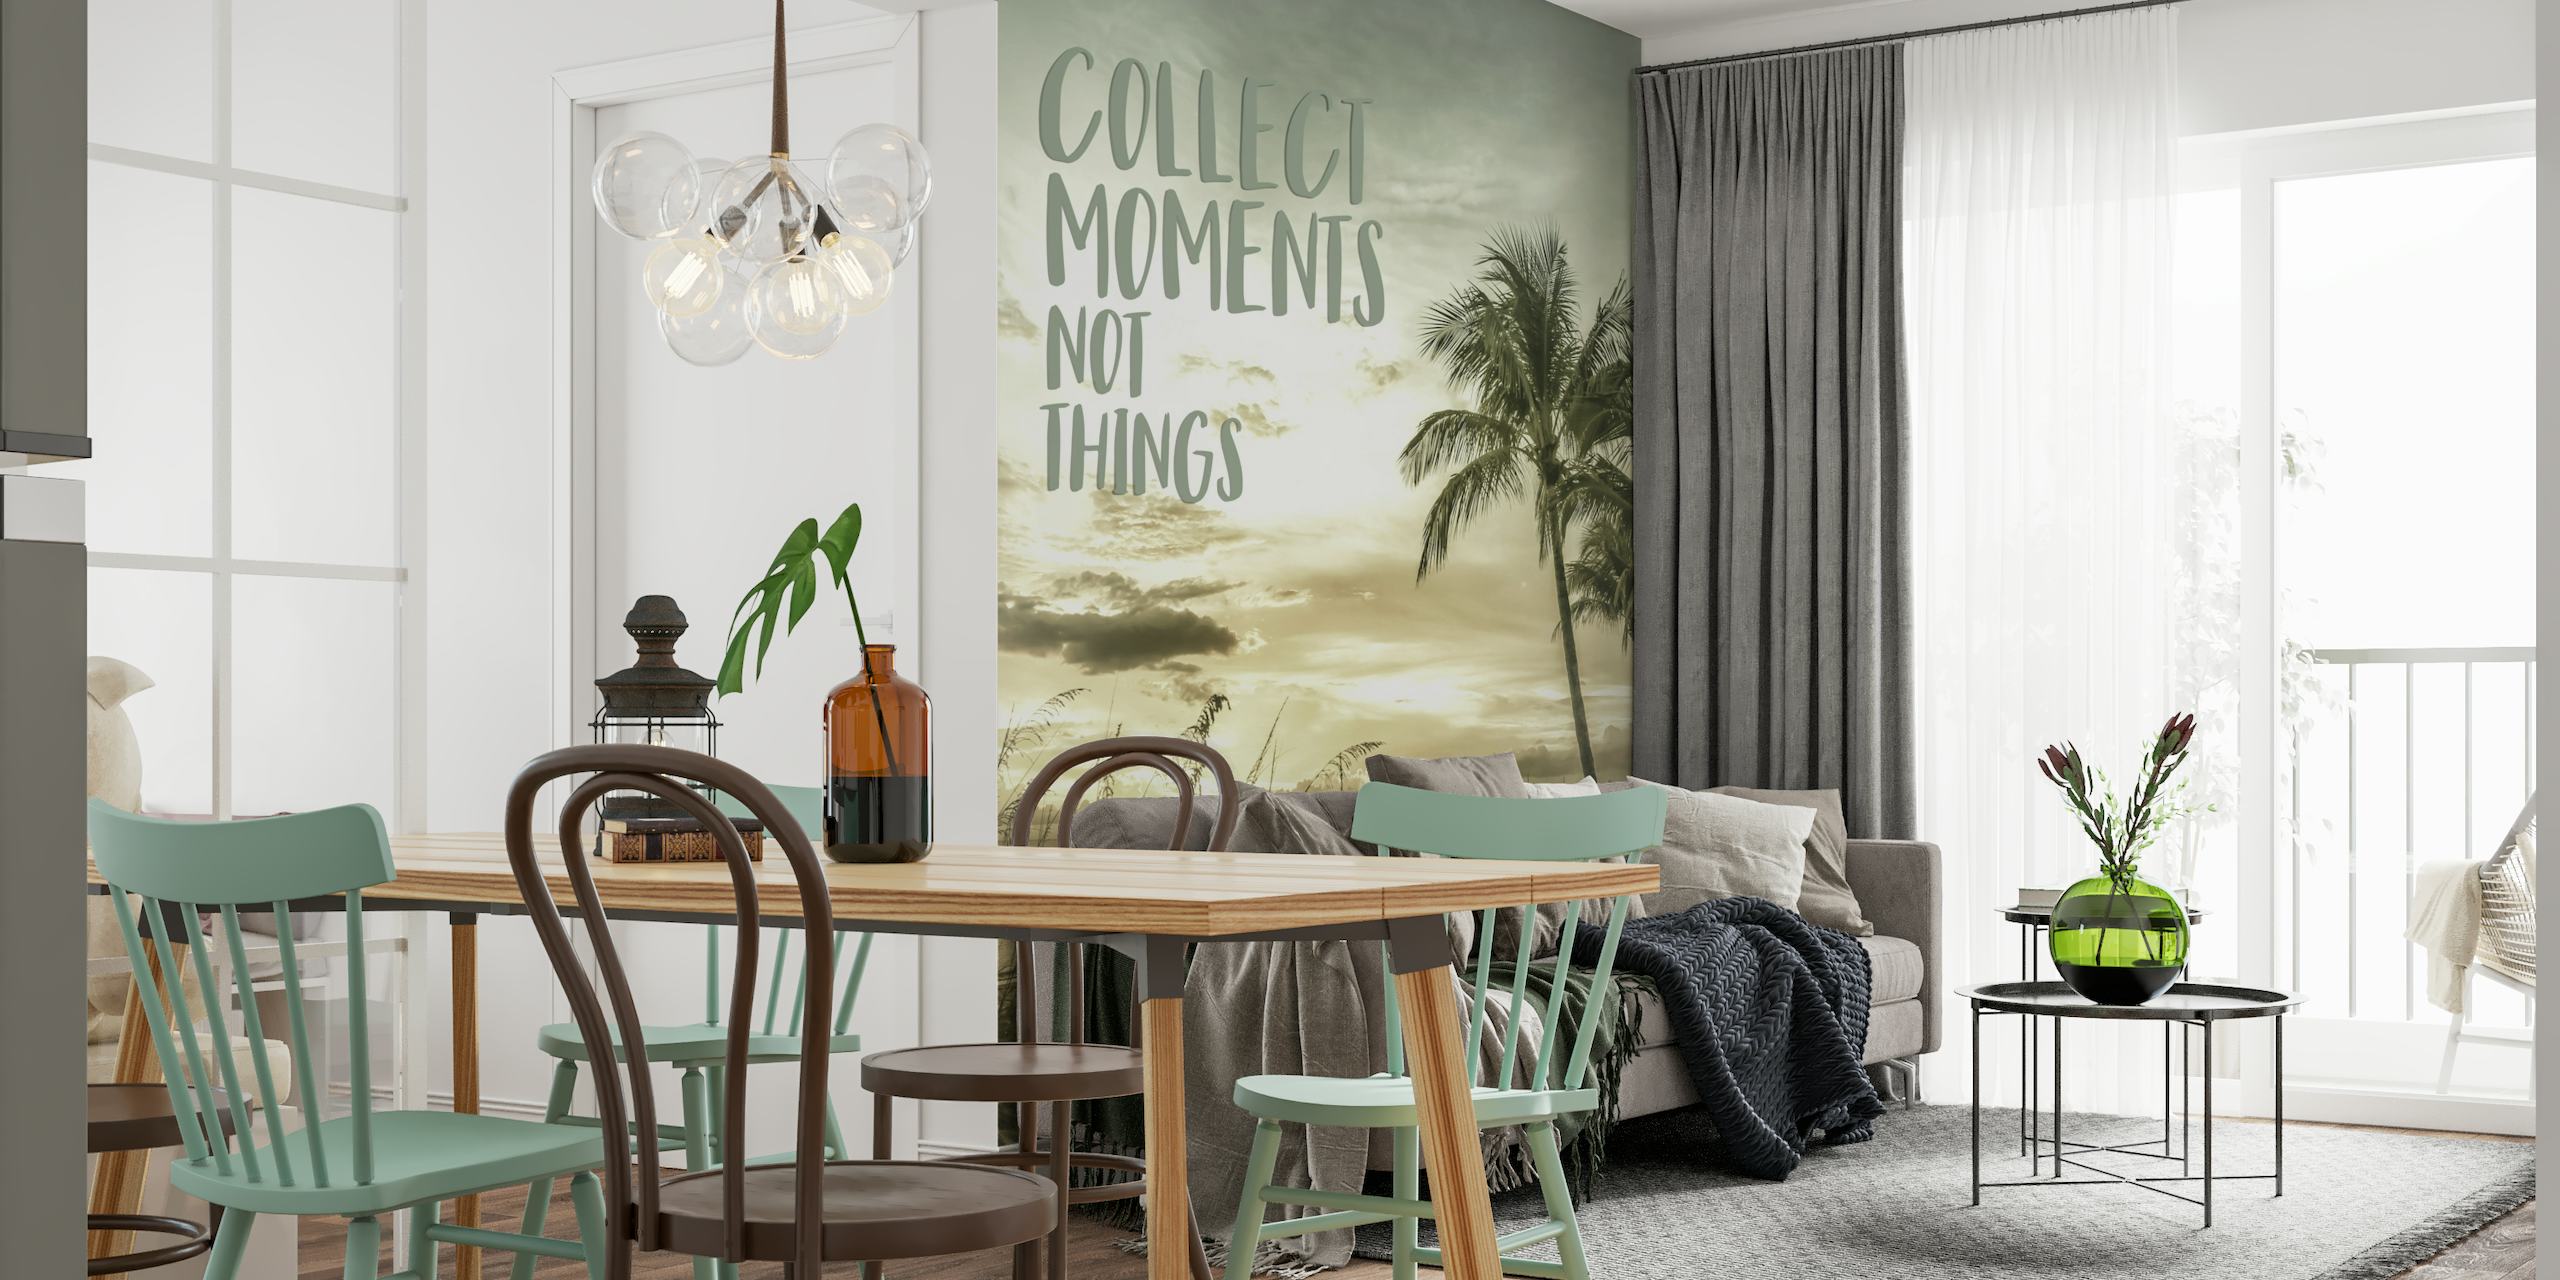 Collect moments not things | Sunset tapetit